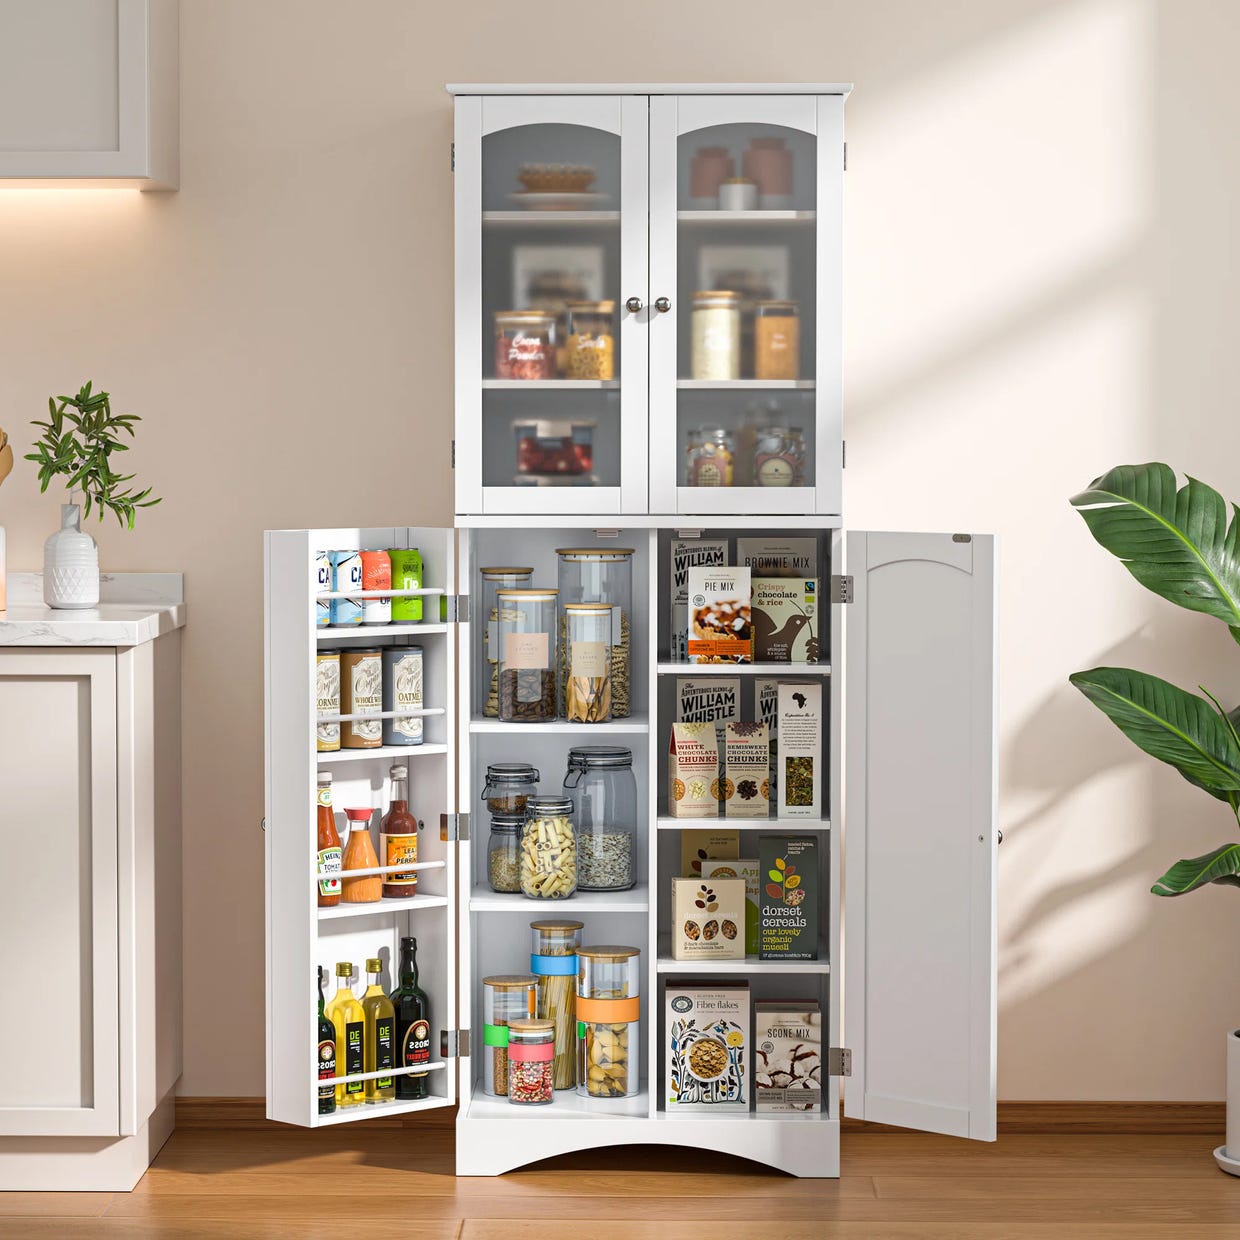 A white pantry cabinet with glass doors filled with various food items such as pasta, grains, oils, and snacks.